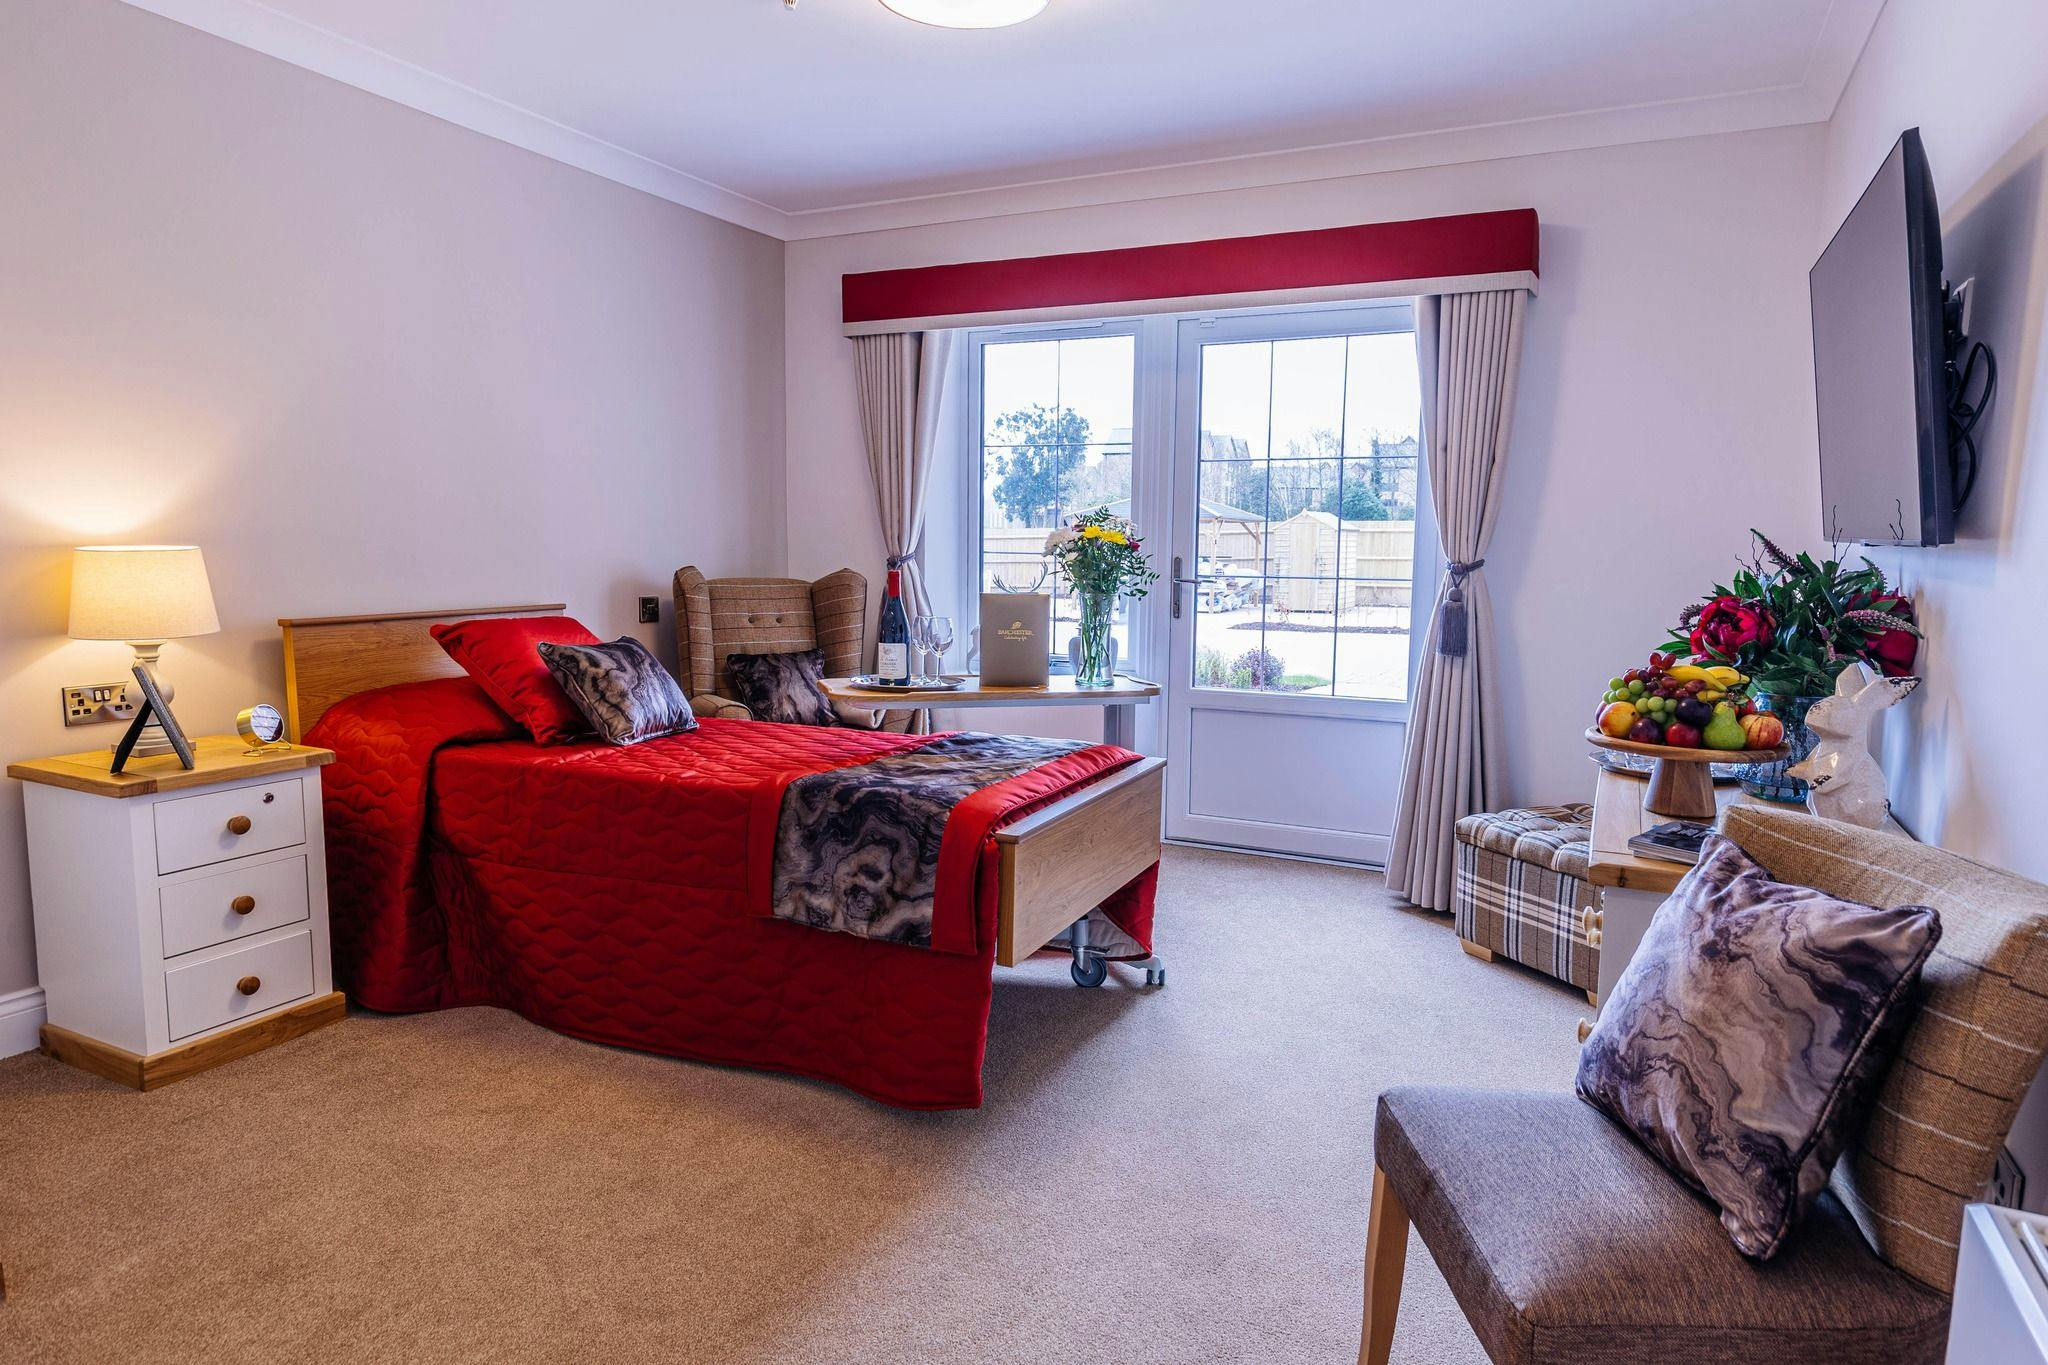 Bedroom at Sycamore Grove Care Home in Eastbourne, East Sussex